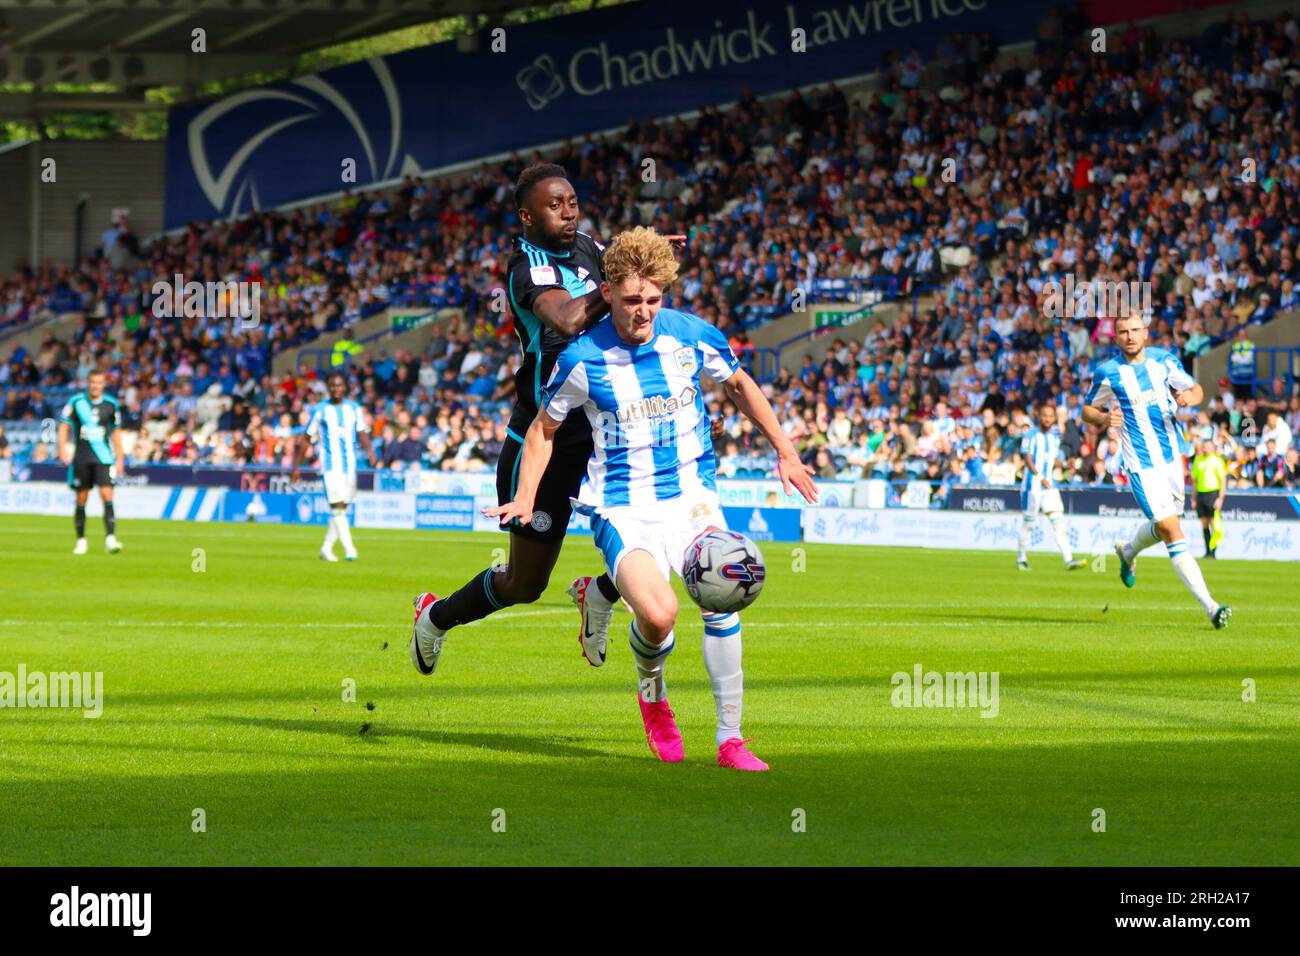 John Smith's Stadium, Huddersfield, England - 12th August 2023 Jack Rudoni (8) of Huddersfield Town shields the ball from Wilfred Ndidi (25) of Leicester City - during the game Huddersfield Town v Leicester City, Sky Bet Championship,  2023/24, John Smith's Stadium, Huddersfield, England - 12th August 2023 Credit: Mathew Marsden/WhiteRosePhotos/Alamy Live News Stock Photo